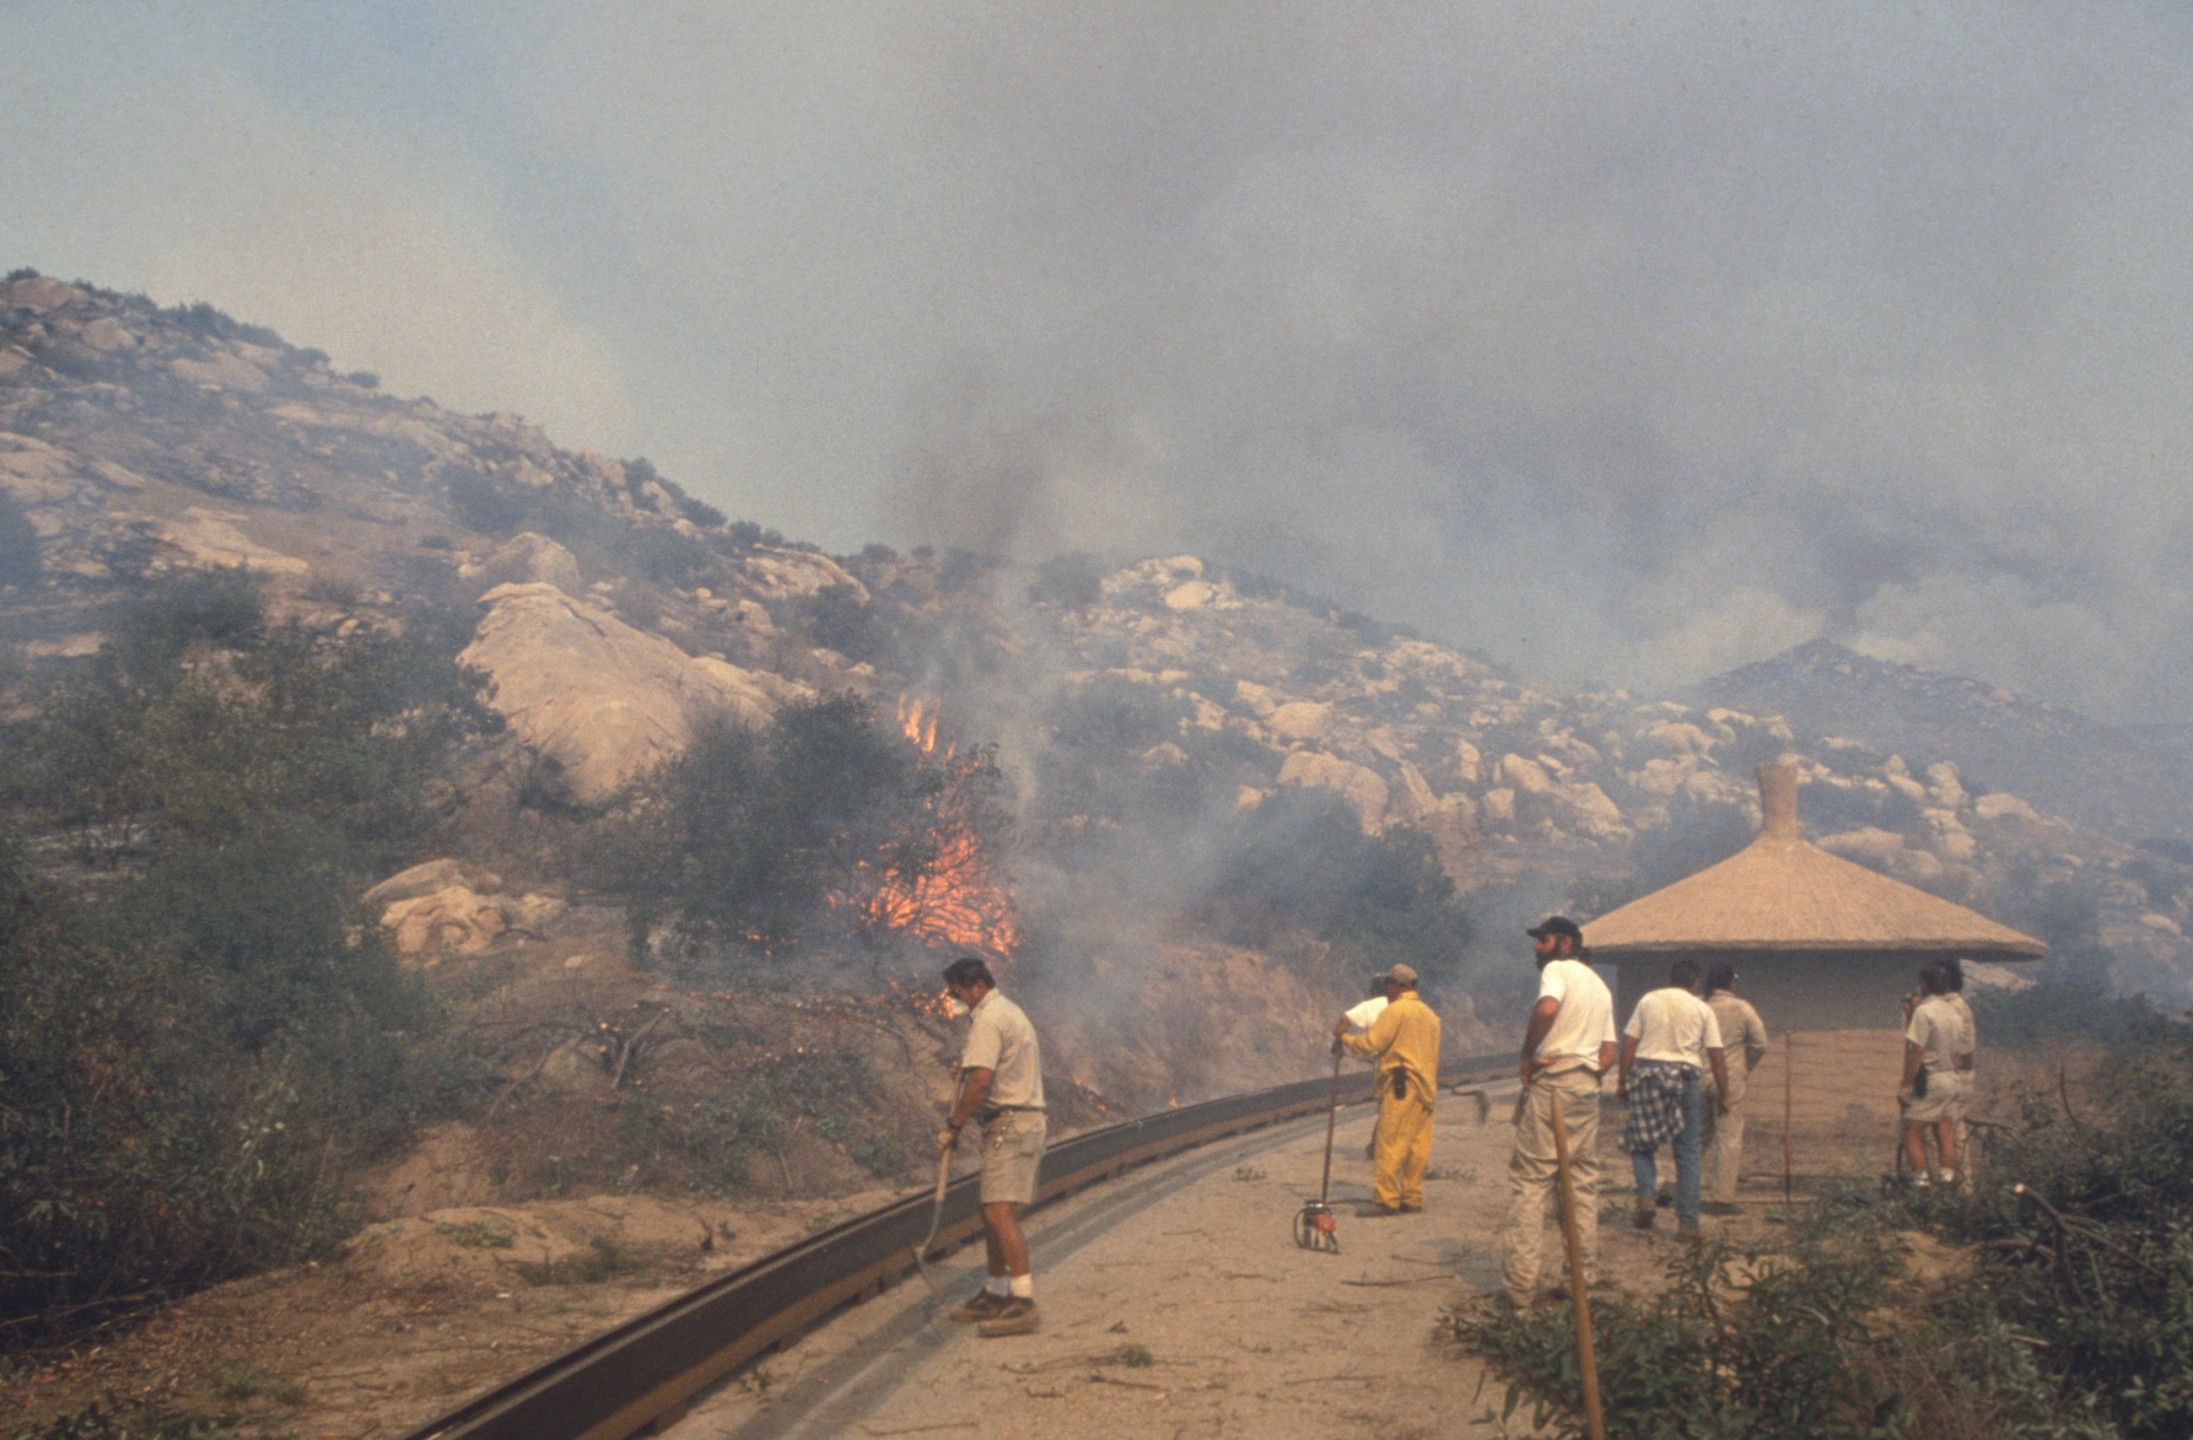 1993 wildfires at the Wild Animal Park